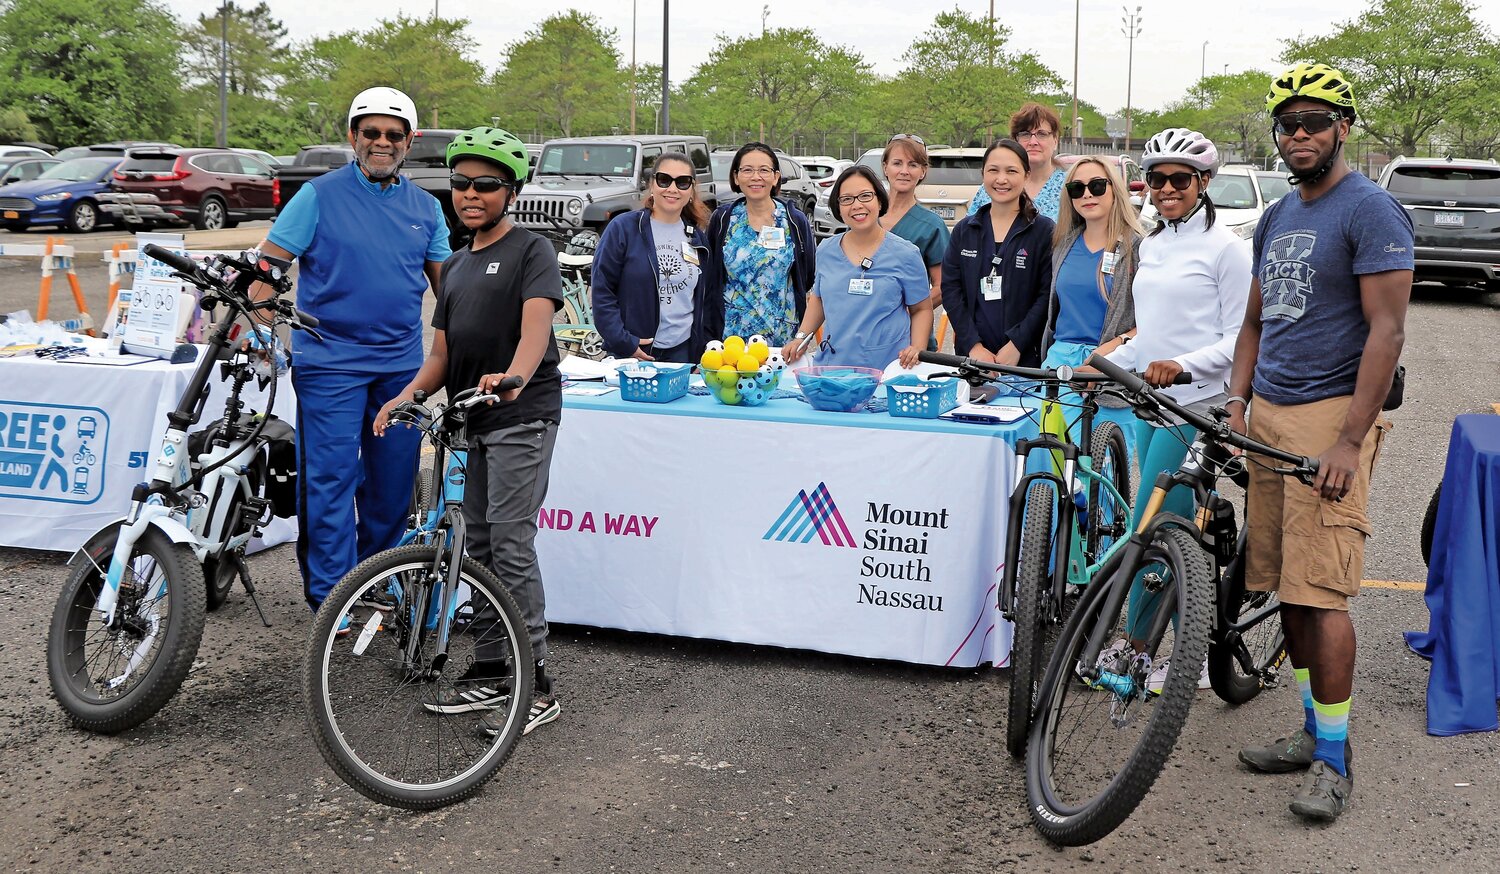 Lionel Senior, far left, with his grandson Isaiah, right of him, along with Mount Sinai staff and other bicyclists at the Mount Sinai blood pressure check table at the Bike Parade last Saturday.